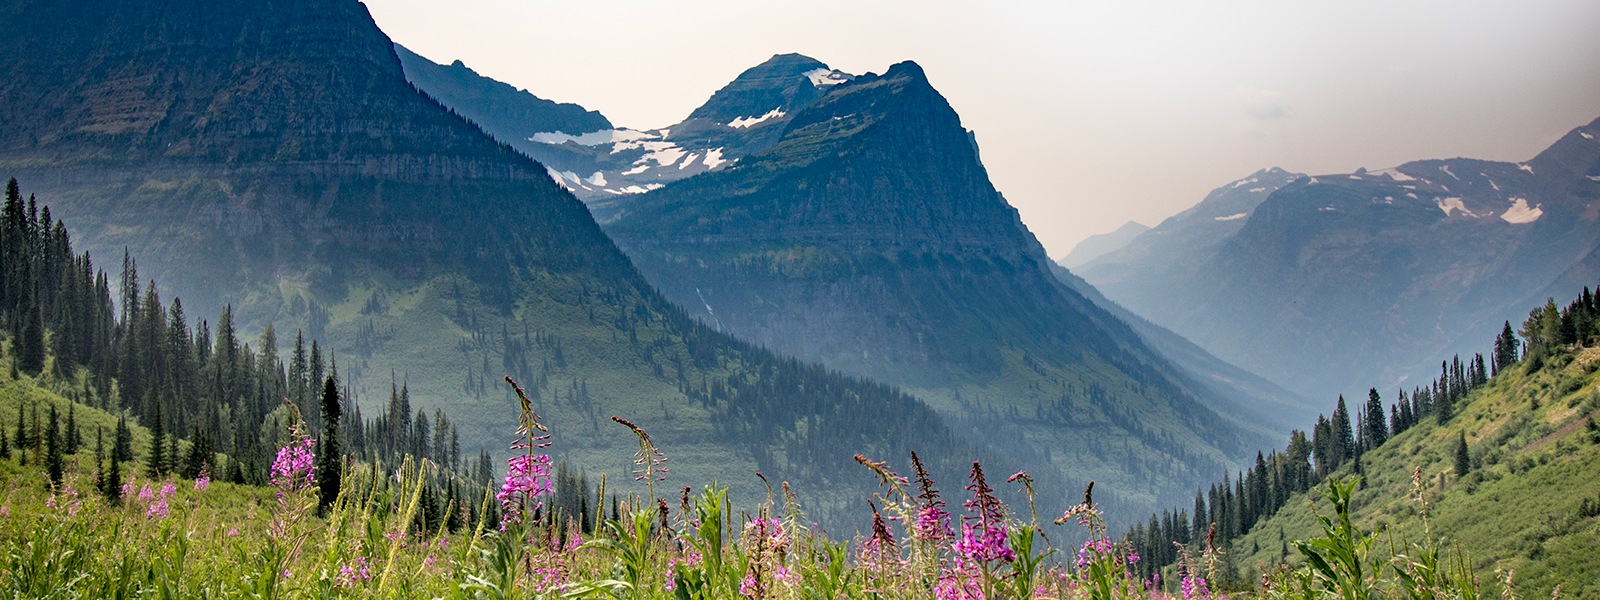 Mountainous landscape, with wildflowers in the foreground and misty, snow-covered peaks in the background.